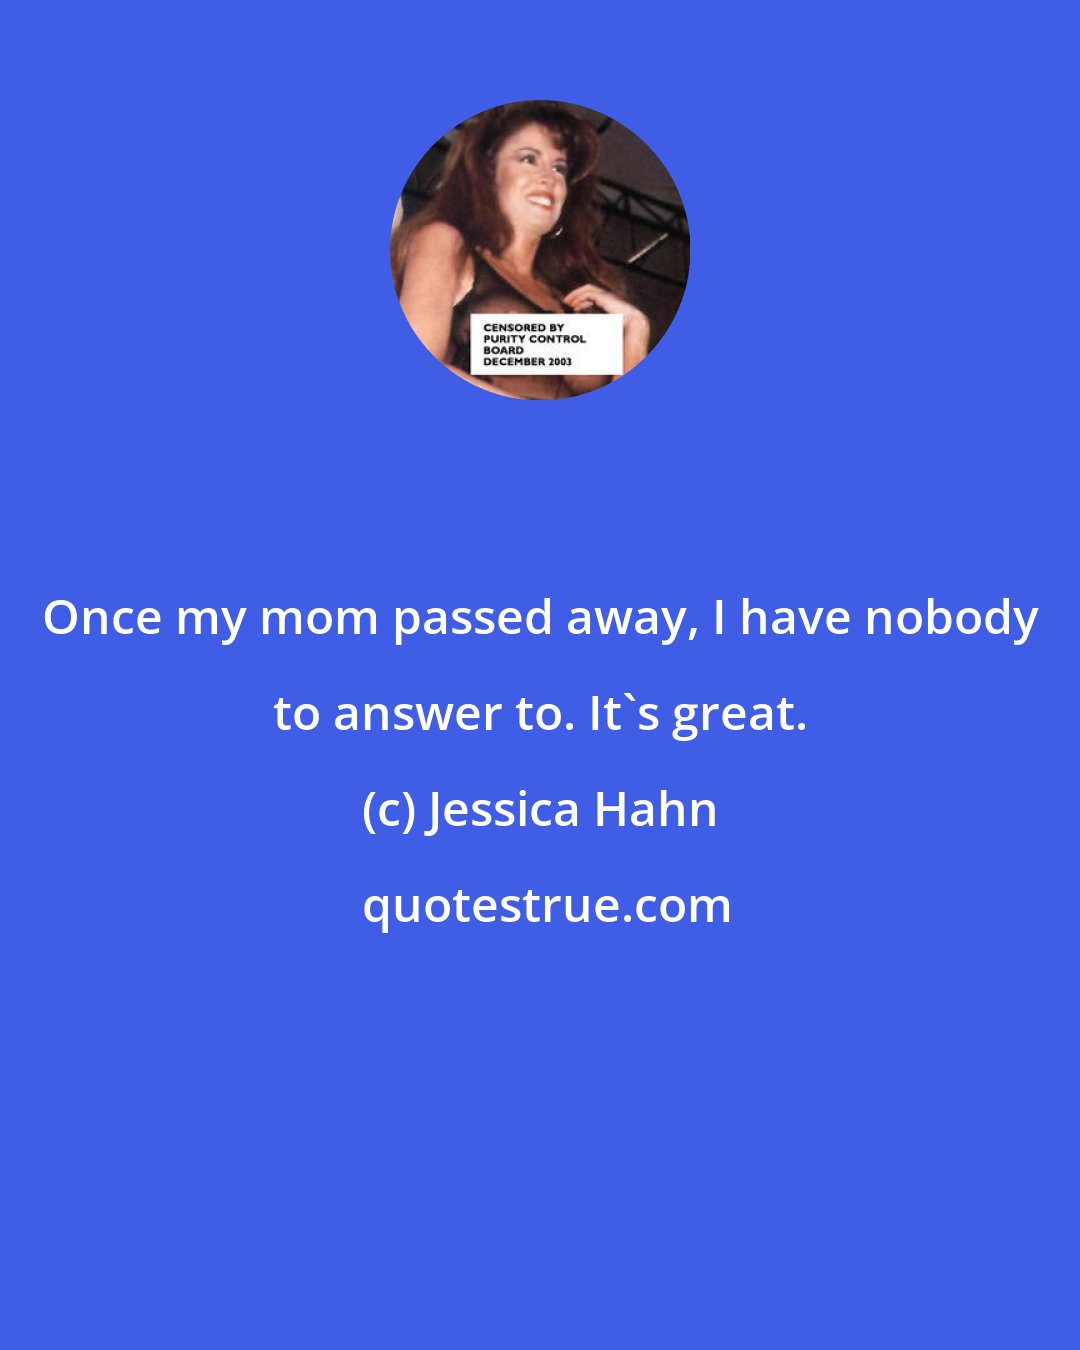 Jessica Hahn: Once my mom passed away, I have nobody to answer to. It's great.